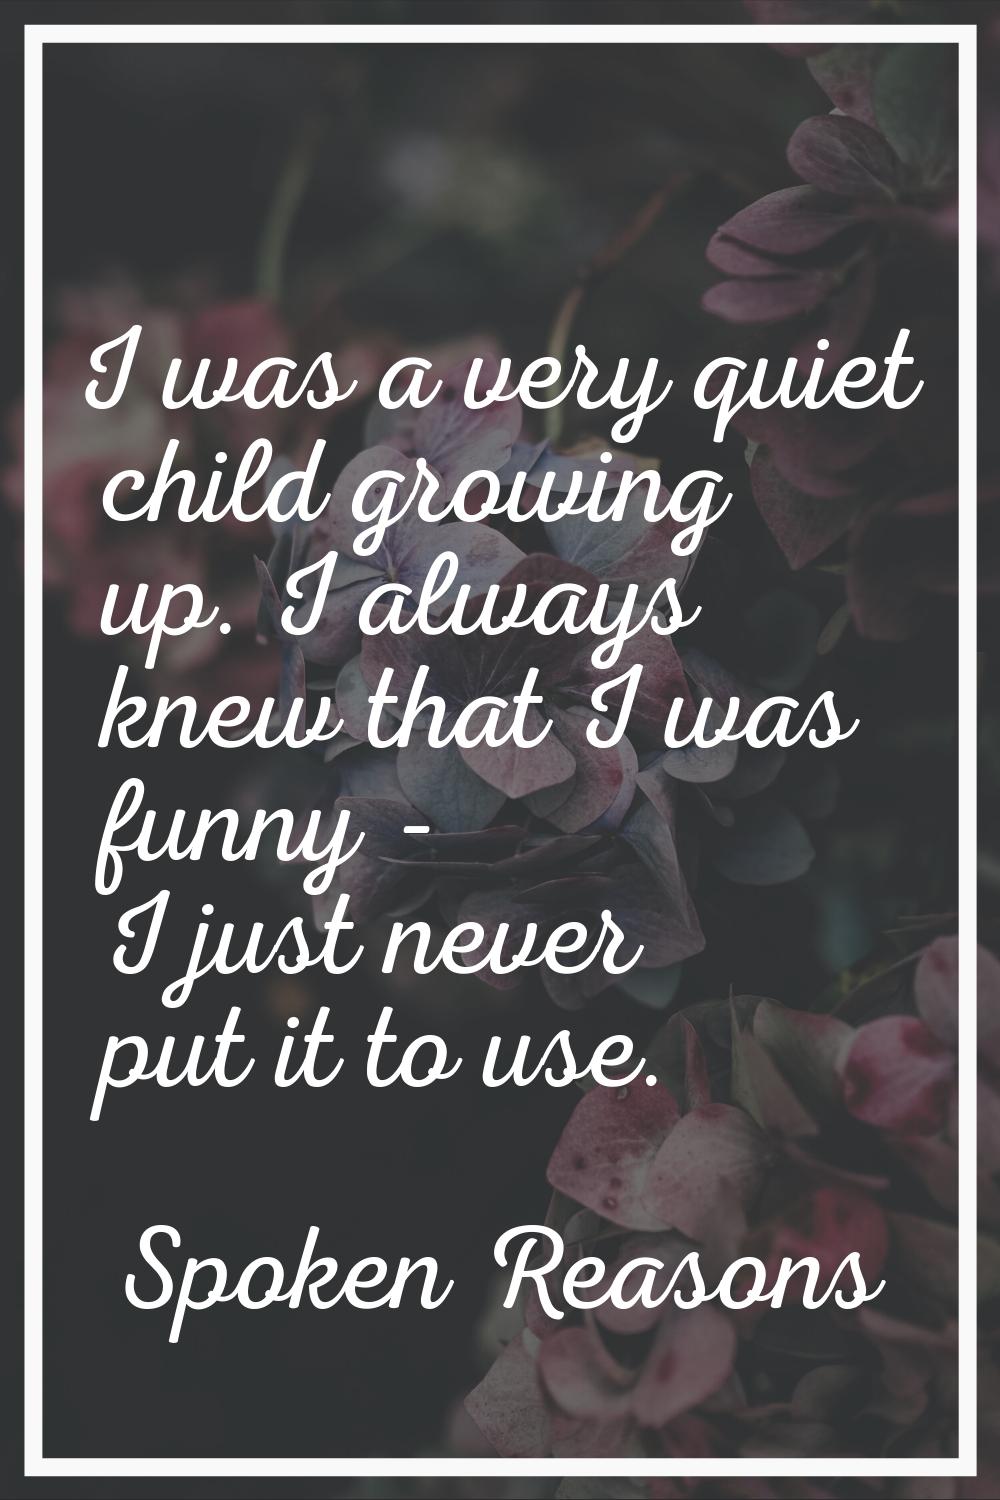 I was a very quiet child growing up. I always knew that I was funny - I just never put it to use.